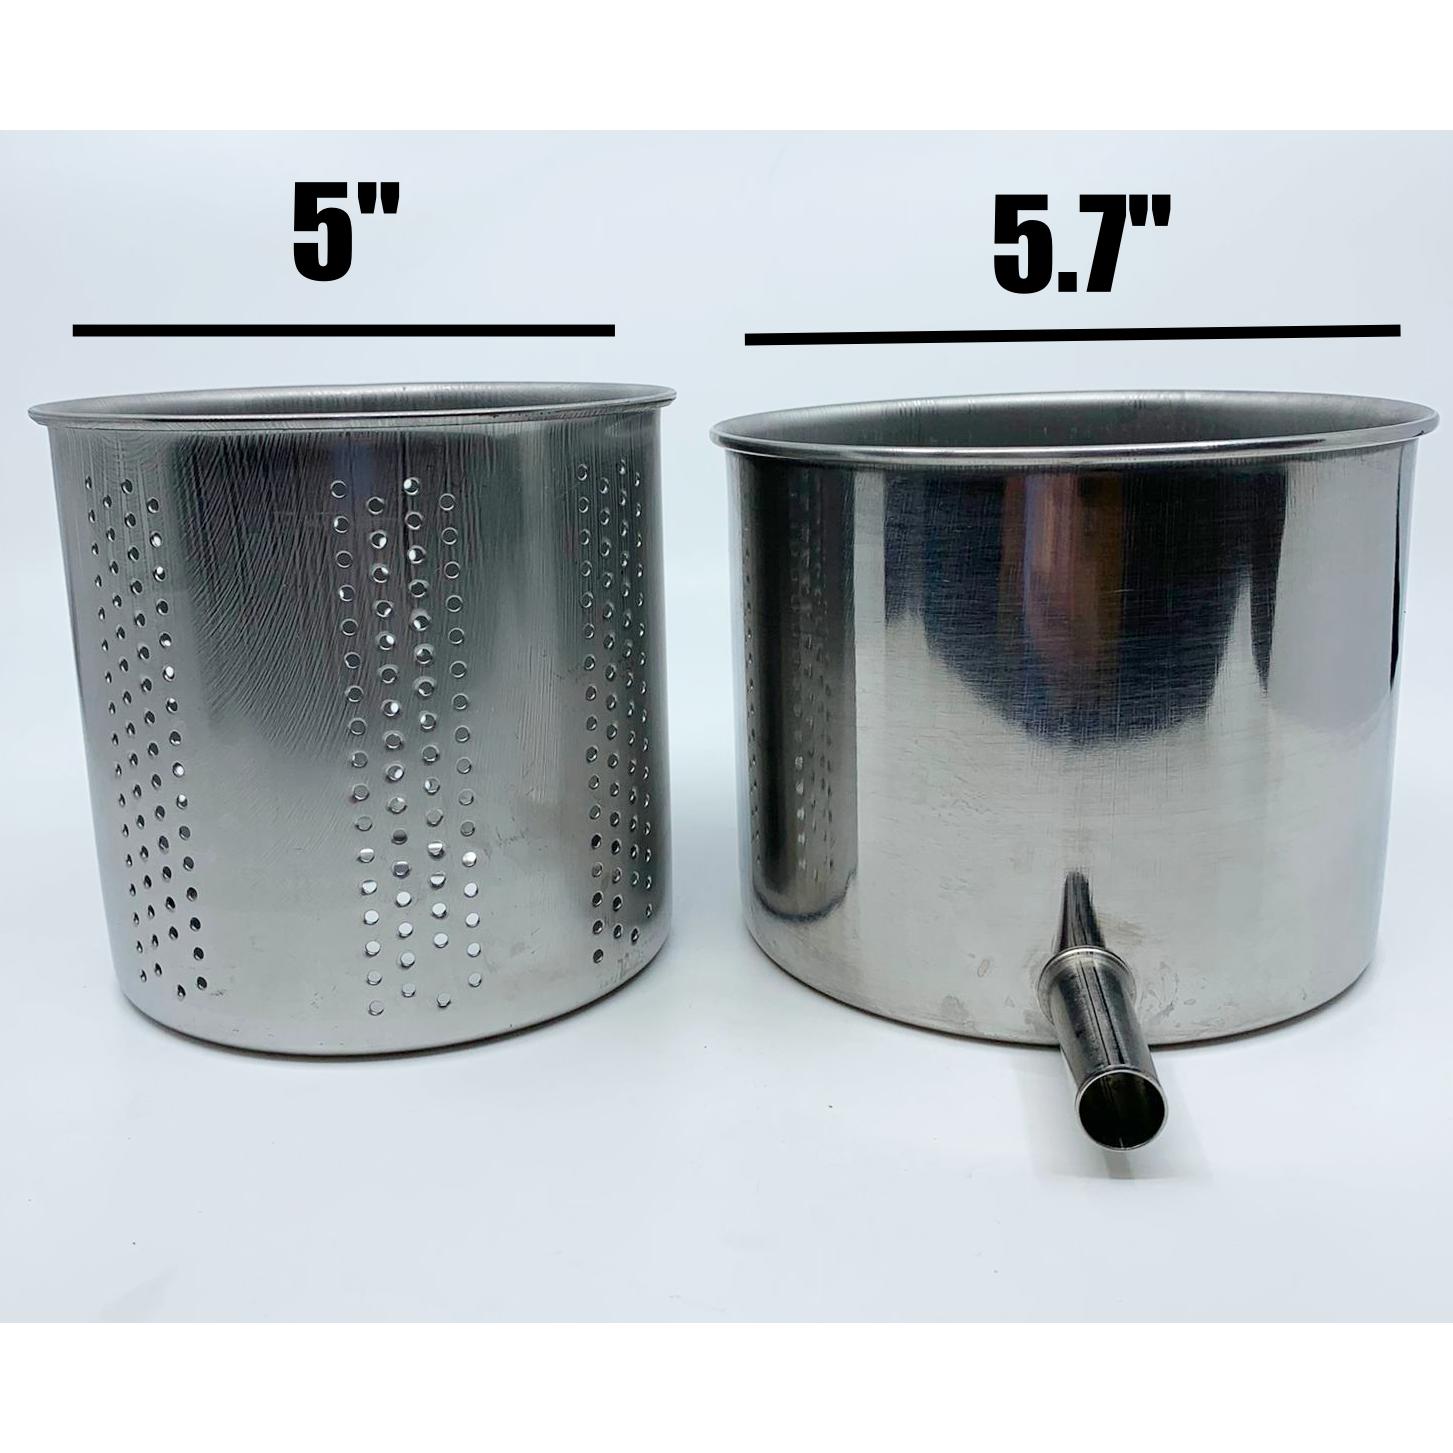 Small Vegetable / Fruit Press 5" - 2 Litre Torchietto Made in Italy Baskets (Perforated and Solid) Dimensions